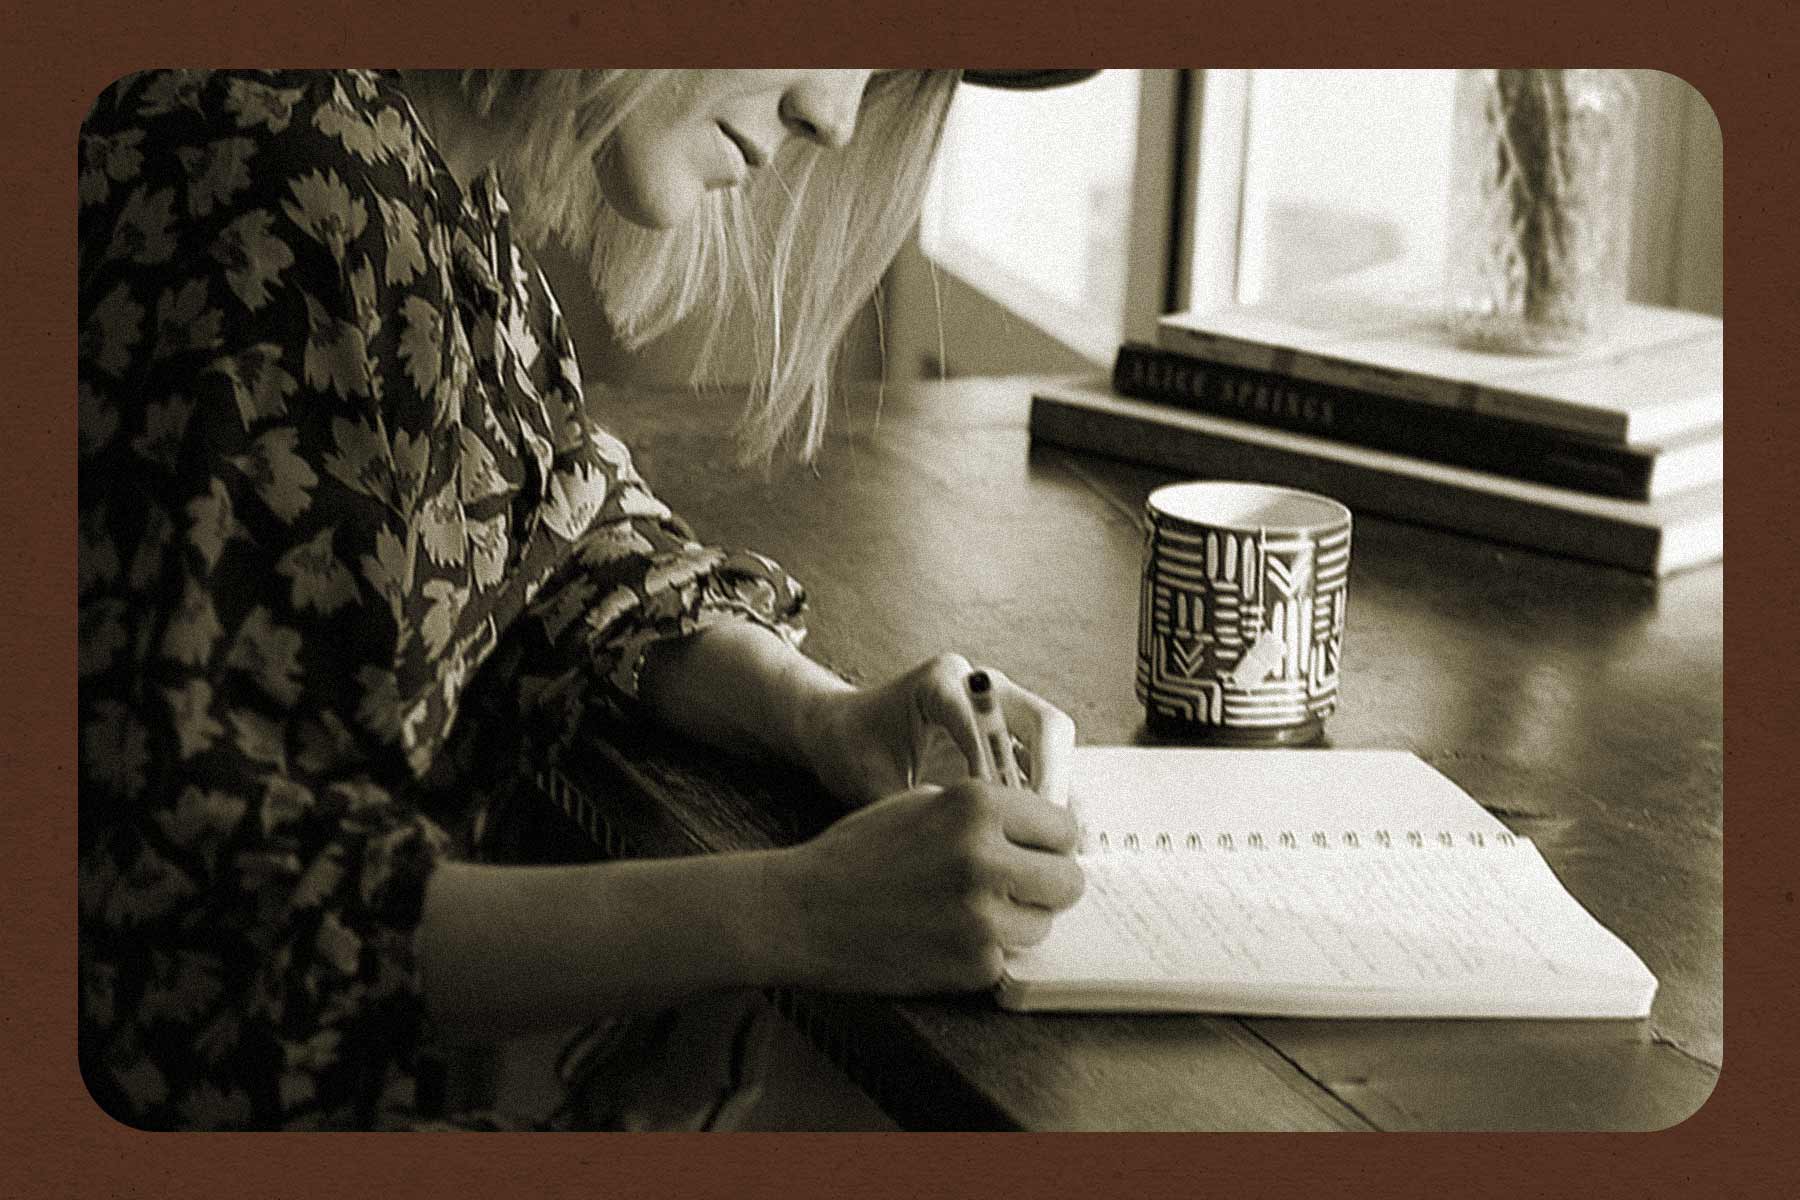 A black-and-white photo of a woman sitting at a desk and writing in a notebook. The image has a brown-coloured border around it.